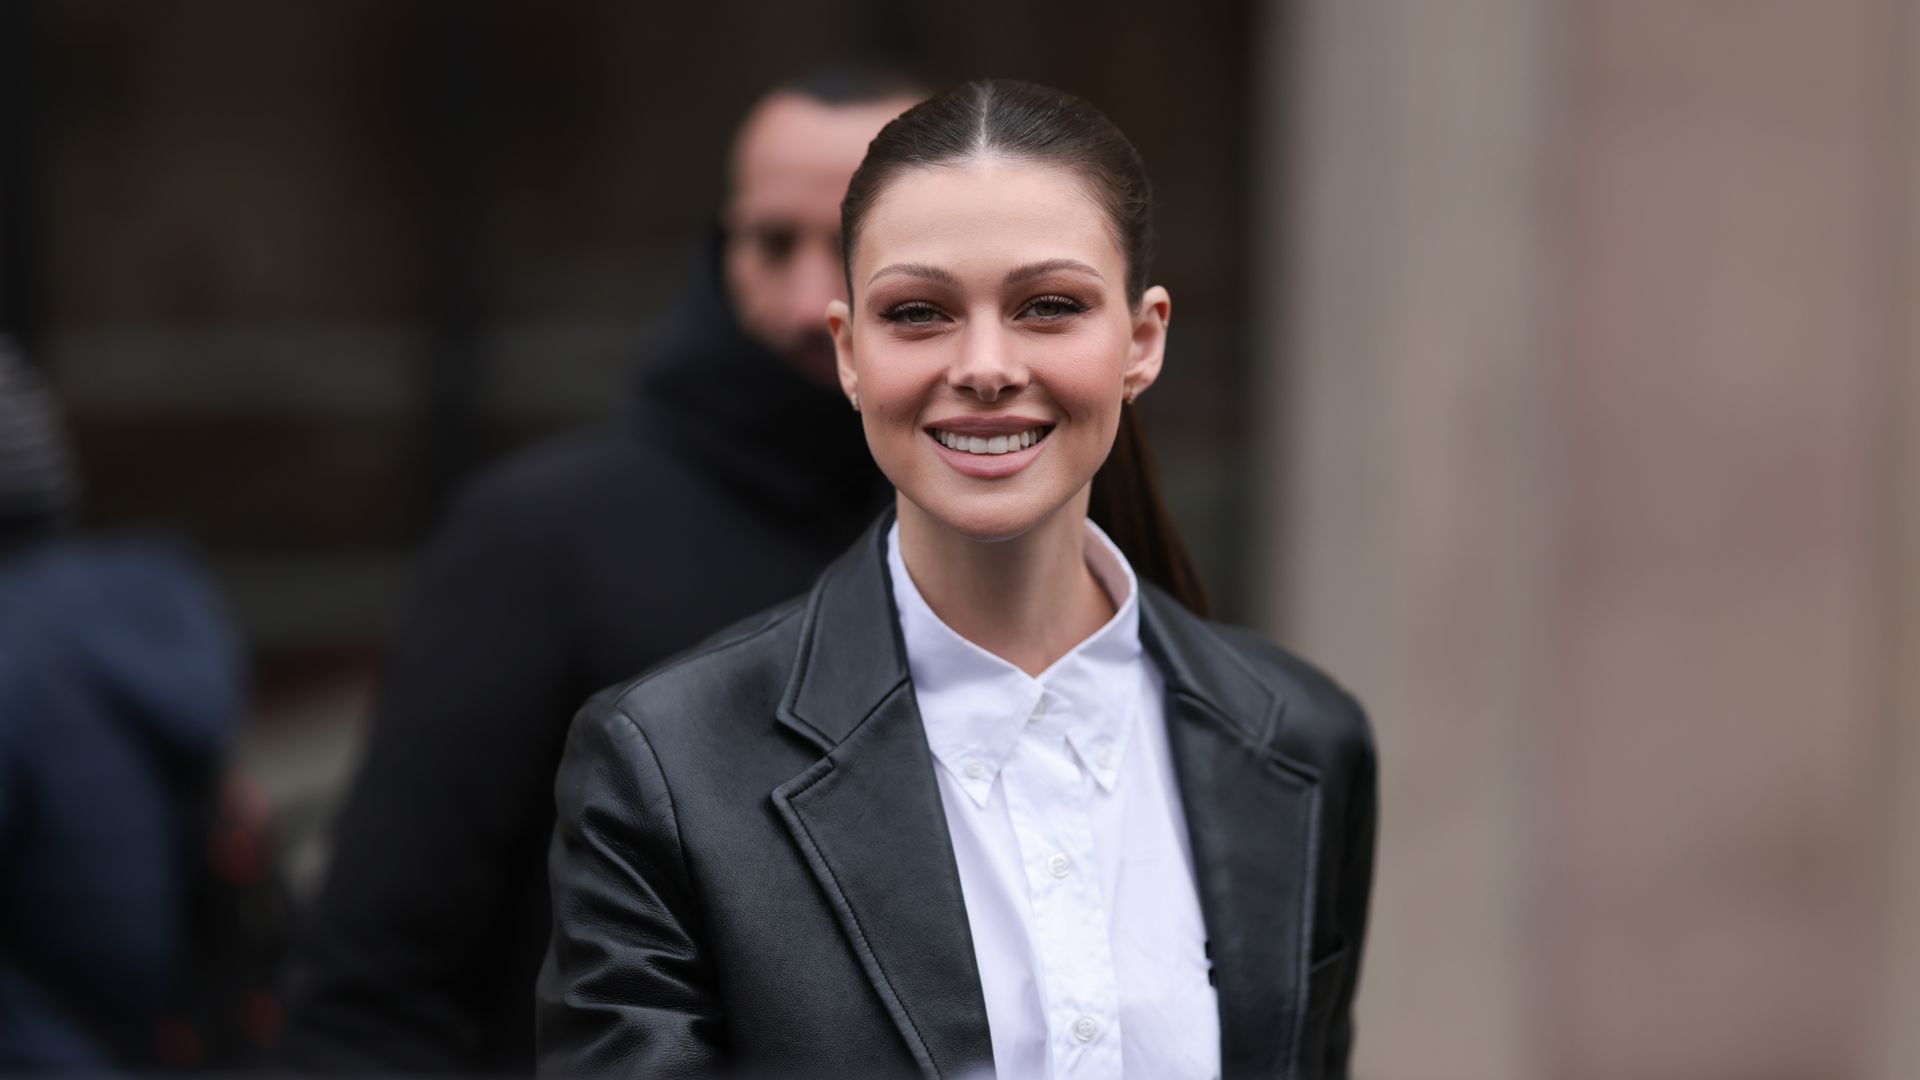 PARIS, FRANCE - MARCH 07: Nicola Peltz seen wearing a black leather jacket and a white blouse before the Miu Miu show on March 07, 2023 in Paris, France. (Photo by Jeremy Moeller/Getty Images)